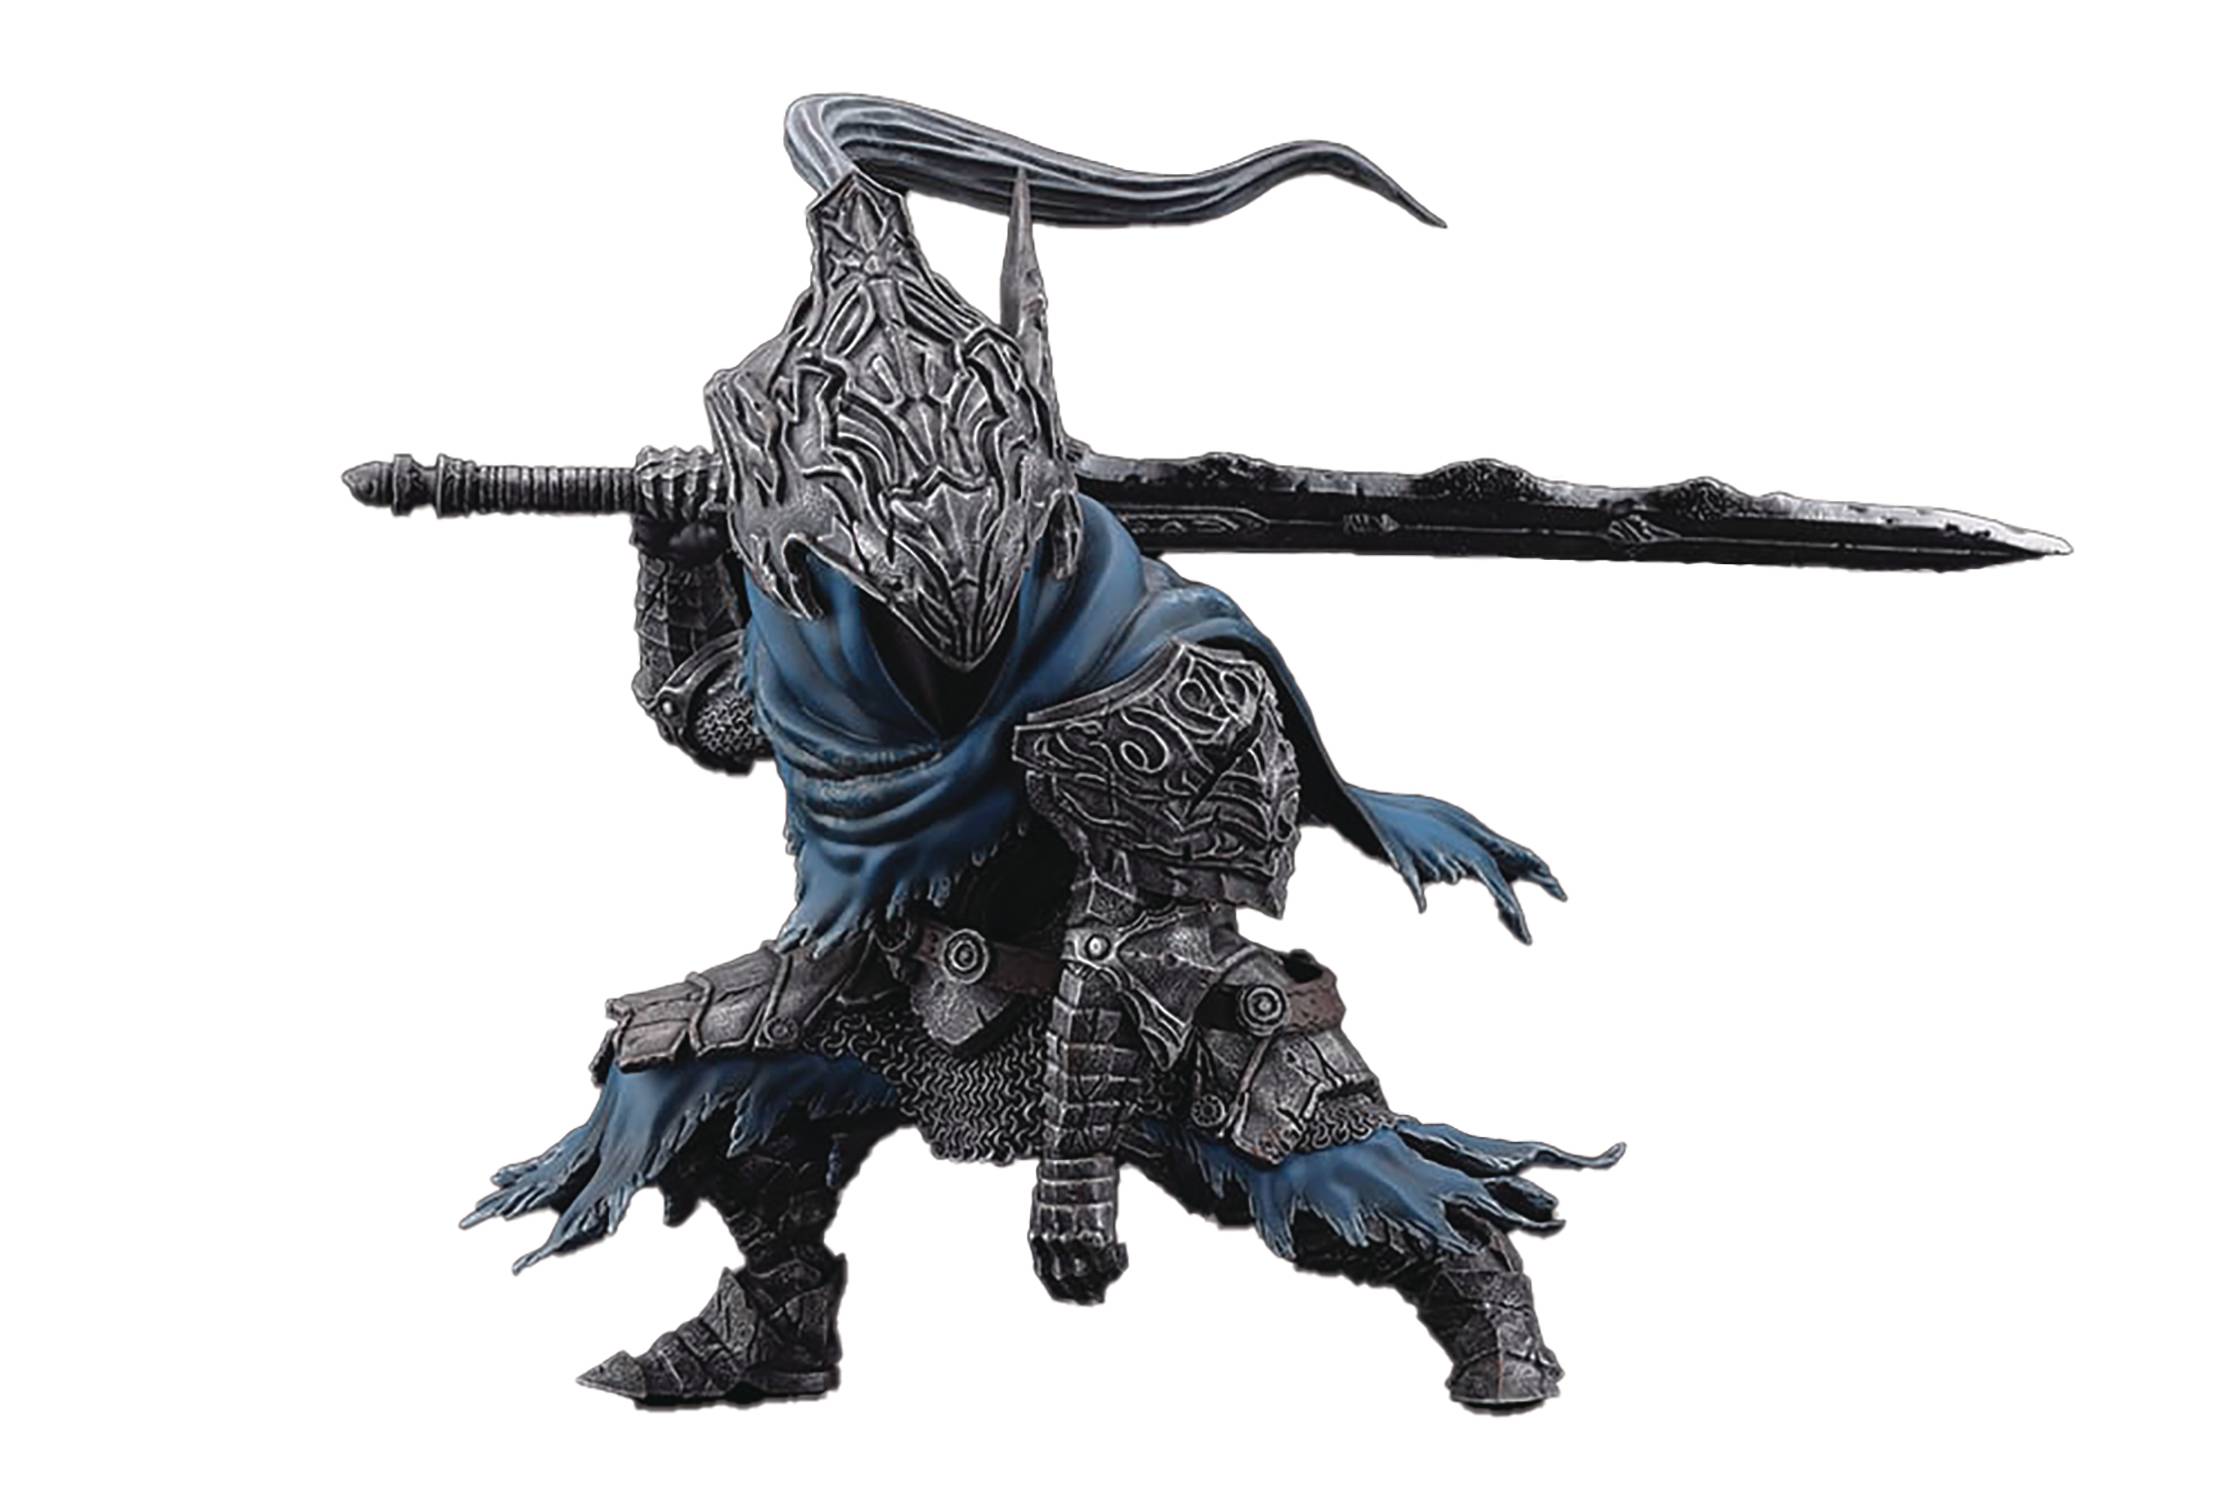 DARK SOULS ARTORIAS OF THE ABYSS Q COLL FIG